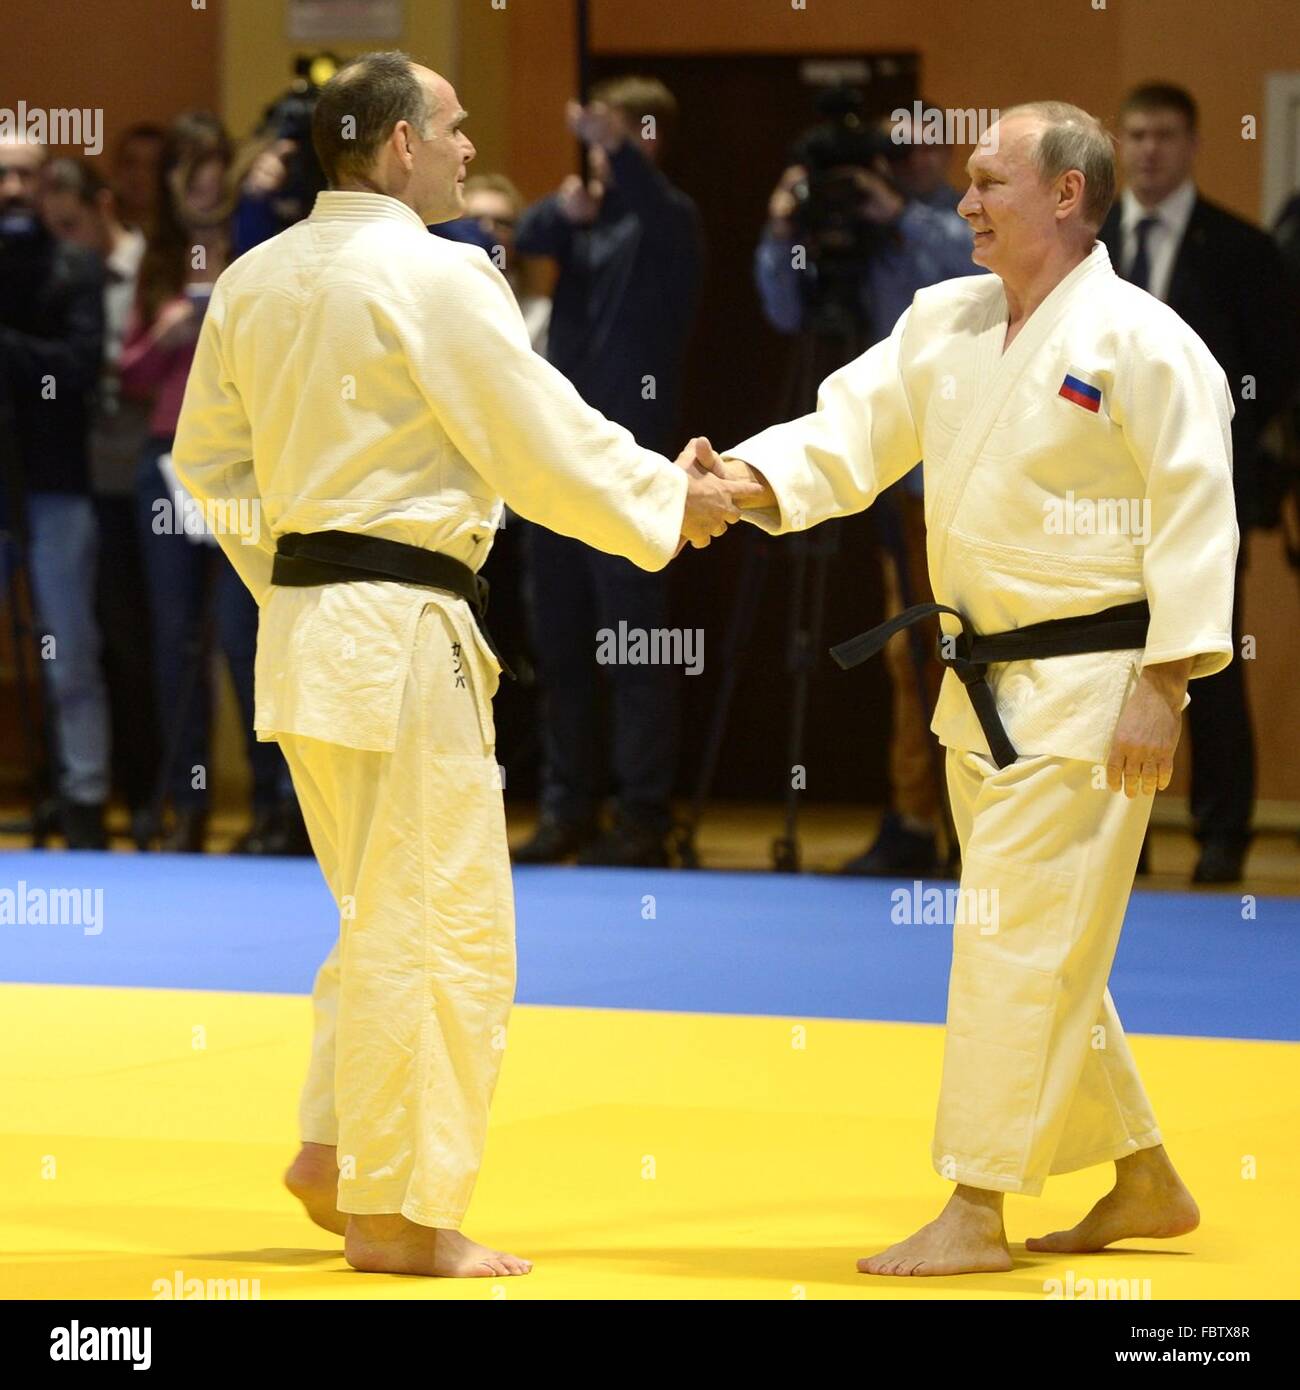 Russian President Vladimir Putin shakes hands with Russian national judo team coach Ezio Gamba before a sparing session January 8, 2016 in Sochi, Russia. Stock Photo